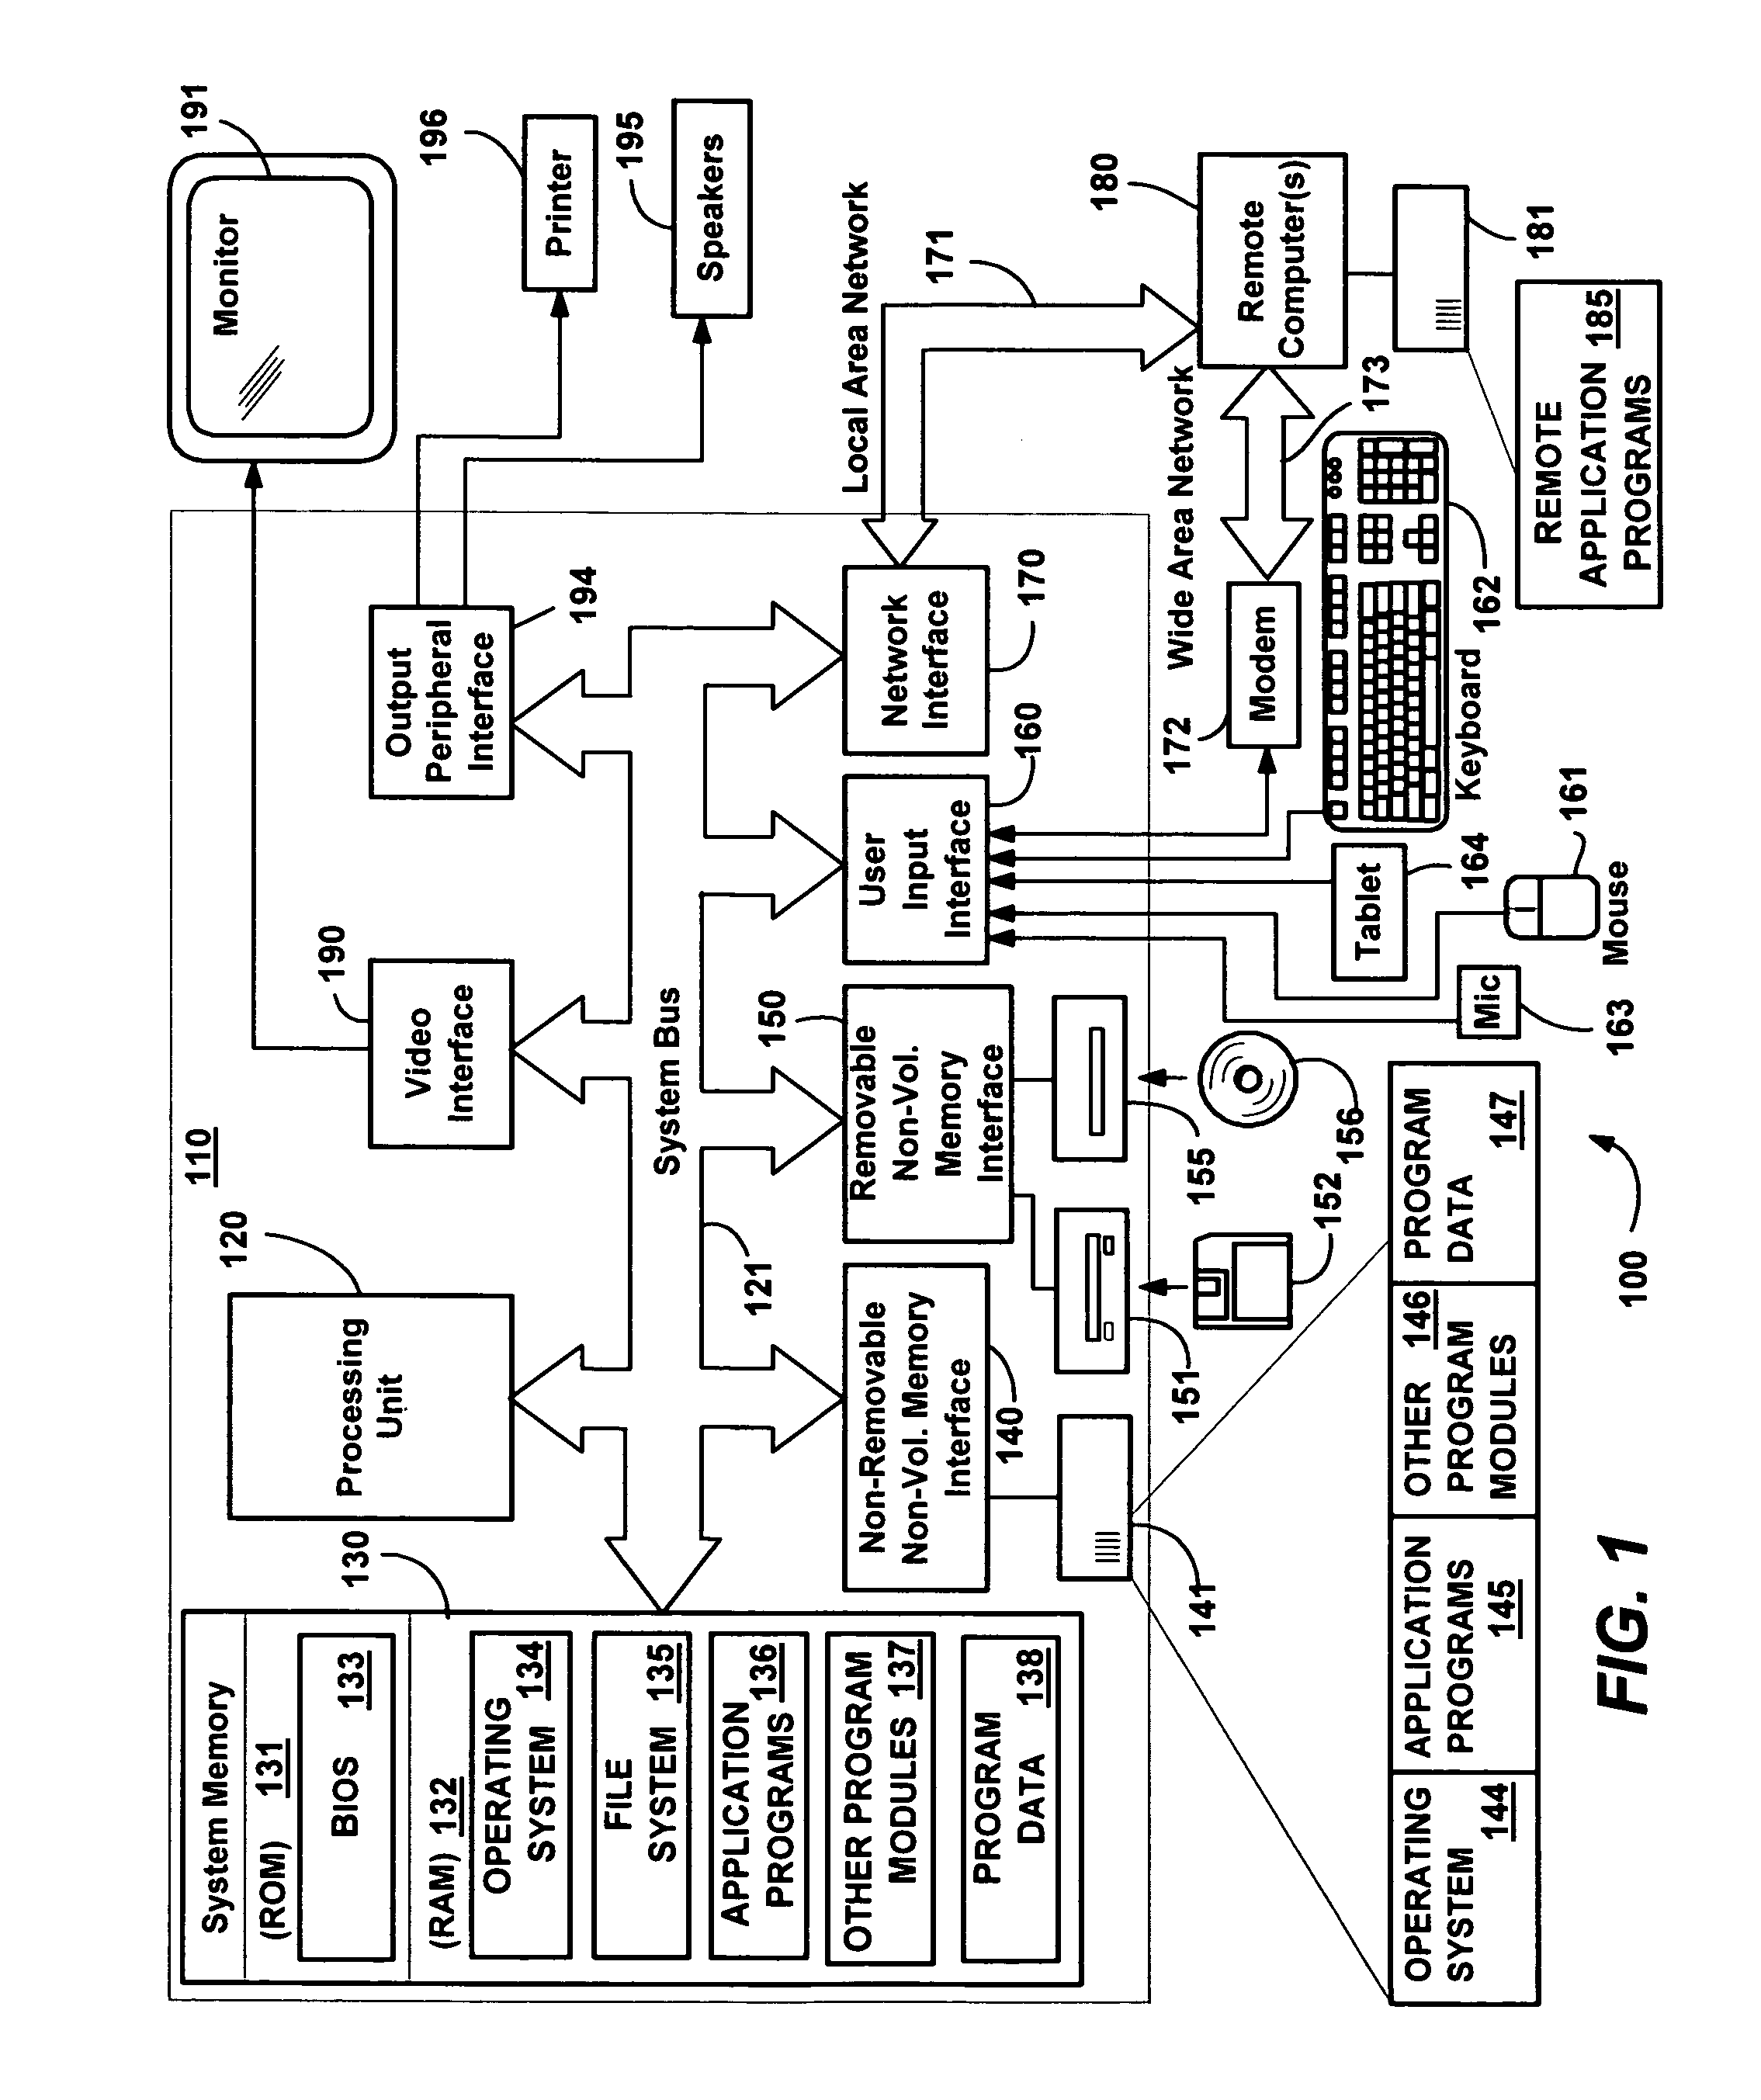 System and method for managing visual structure, timing, and animation in a graphics processing system